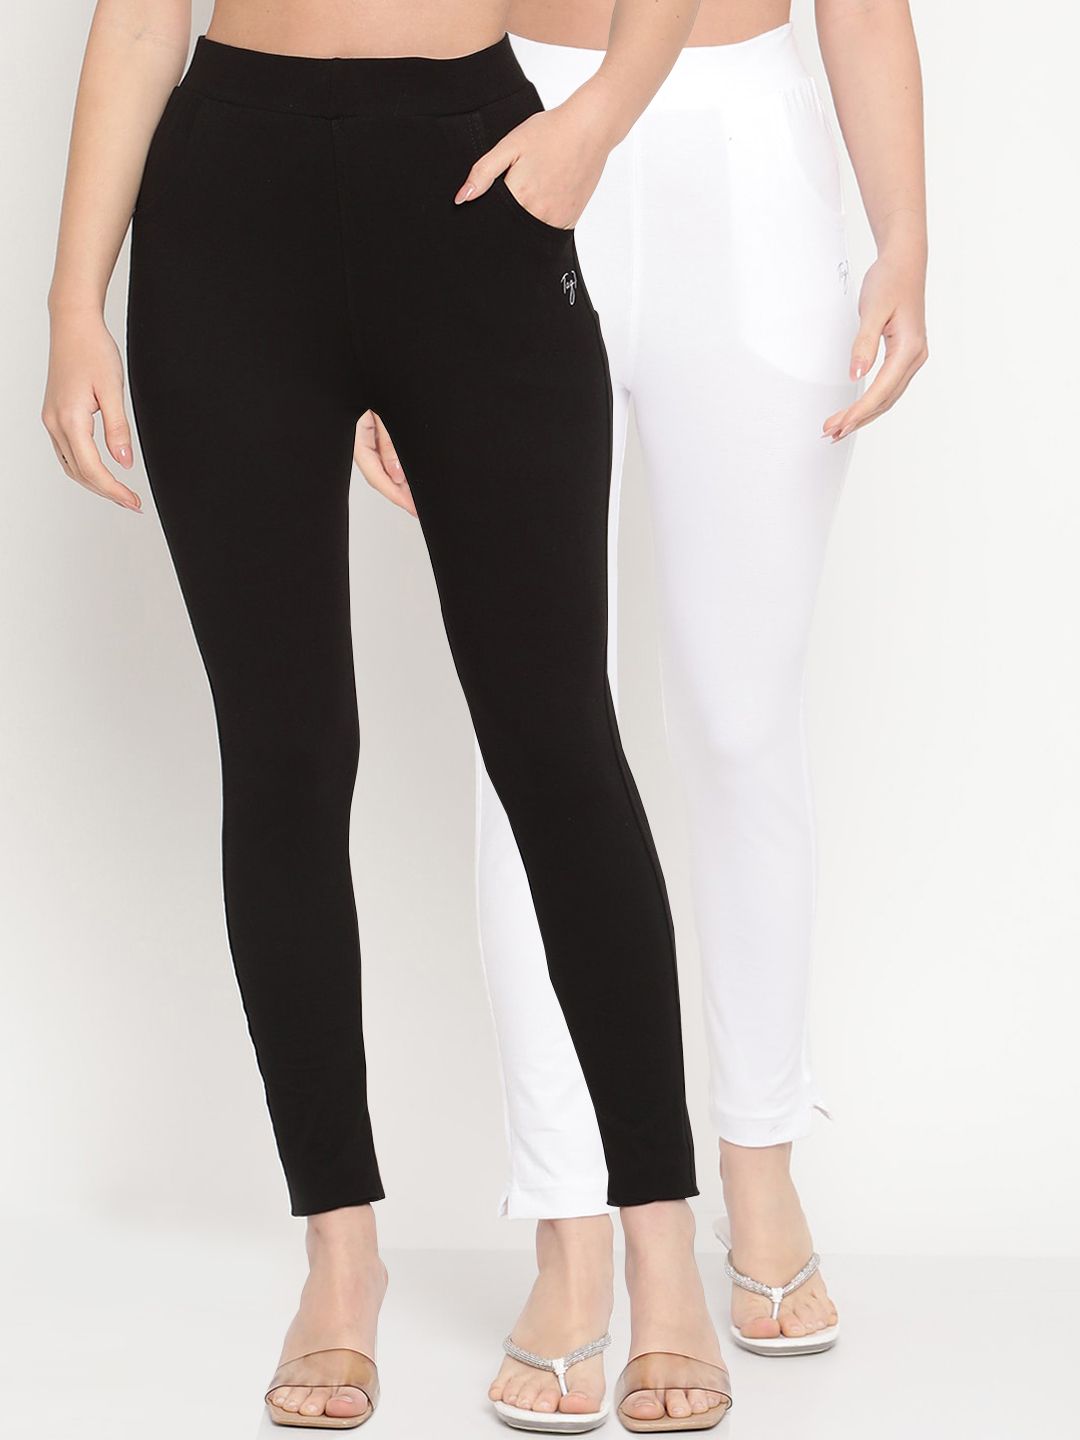 TAG 7 Women Black & White Pack of 2 Straight Fit Ankle-Length Leggings Price in India